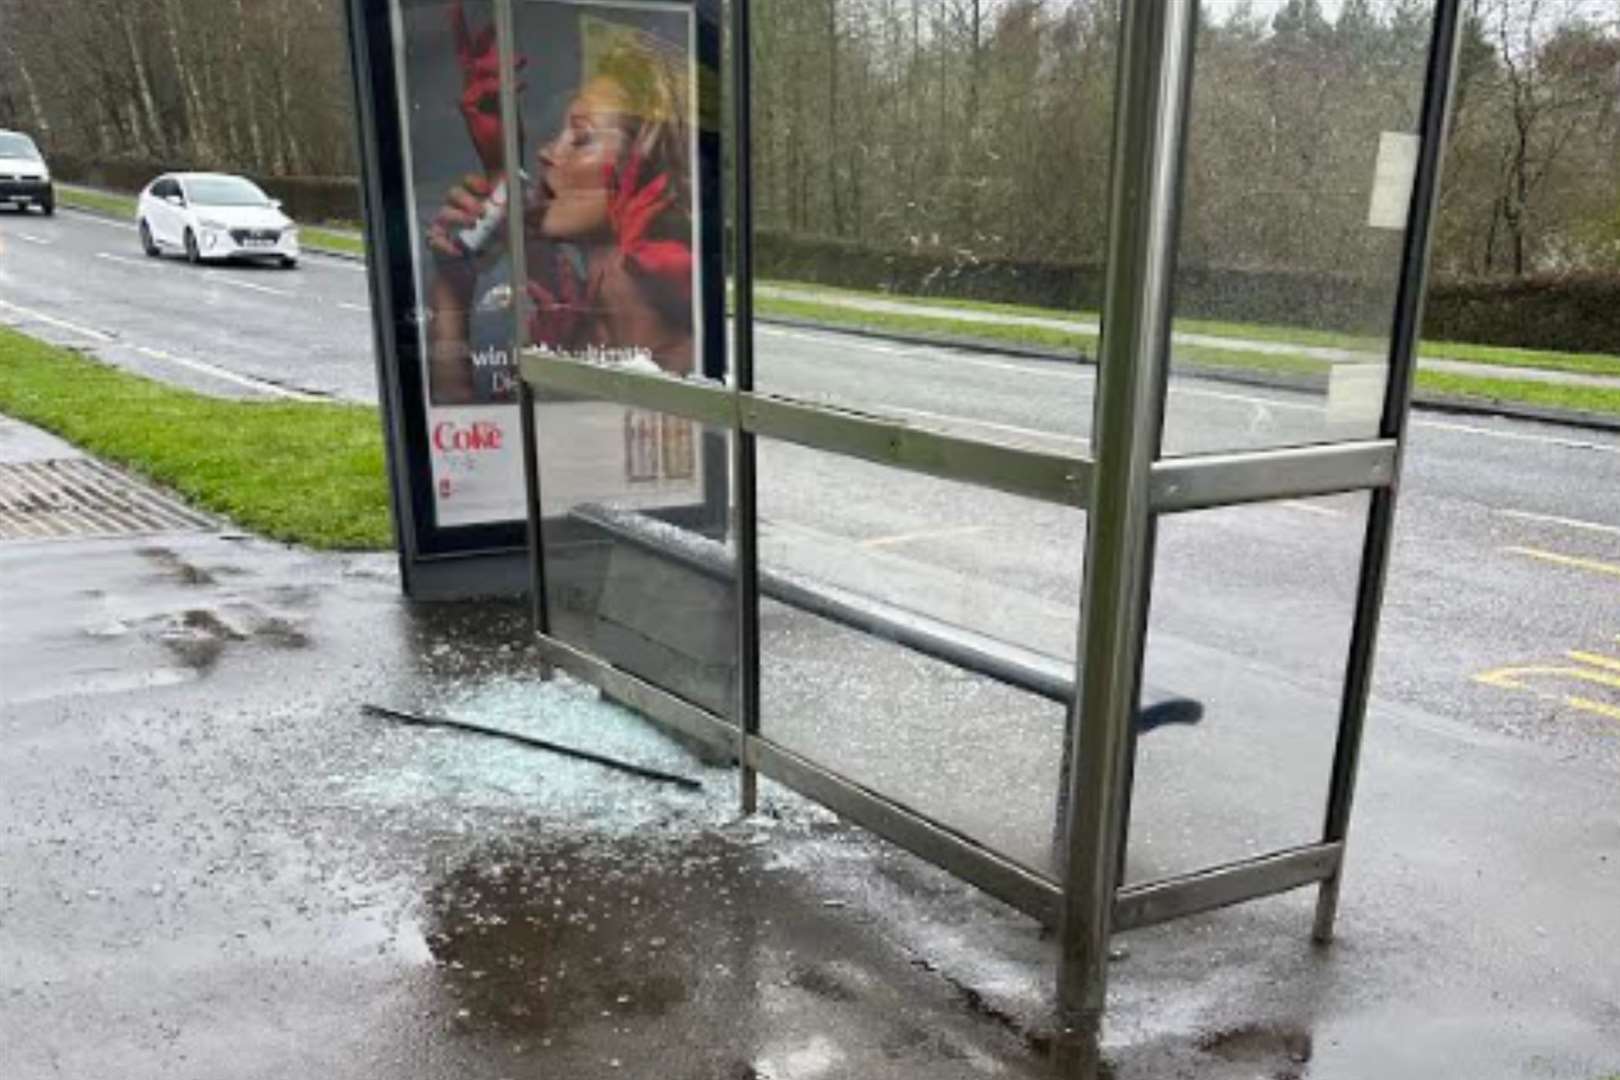 This part of Ashford has been targeted by vandals on several occasions. Picture: Lucy New